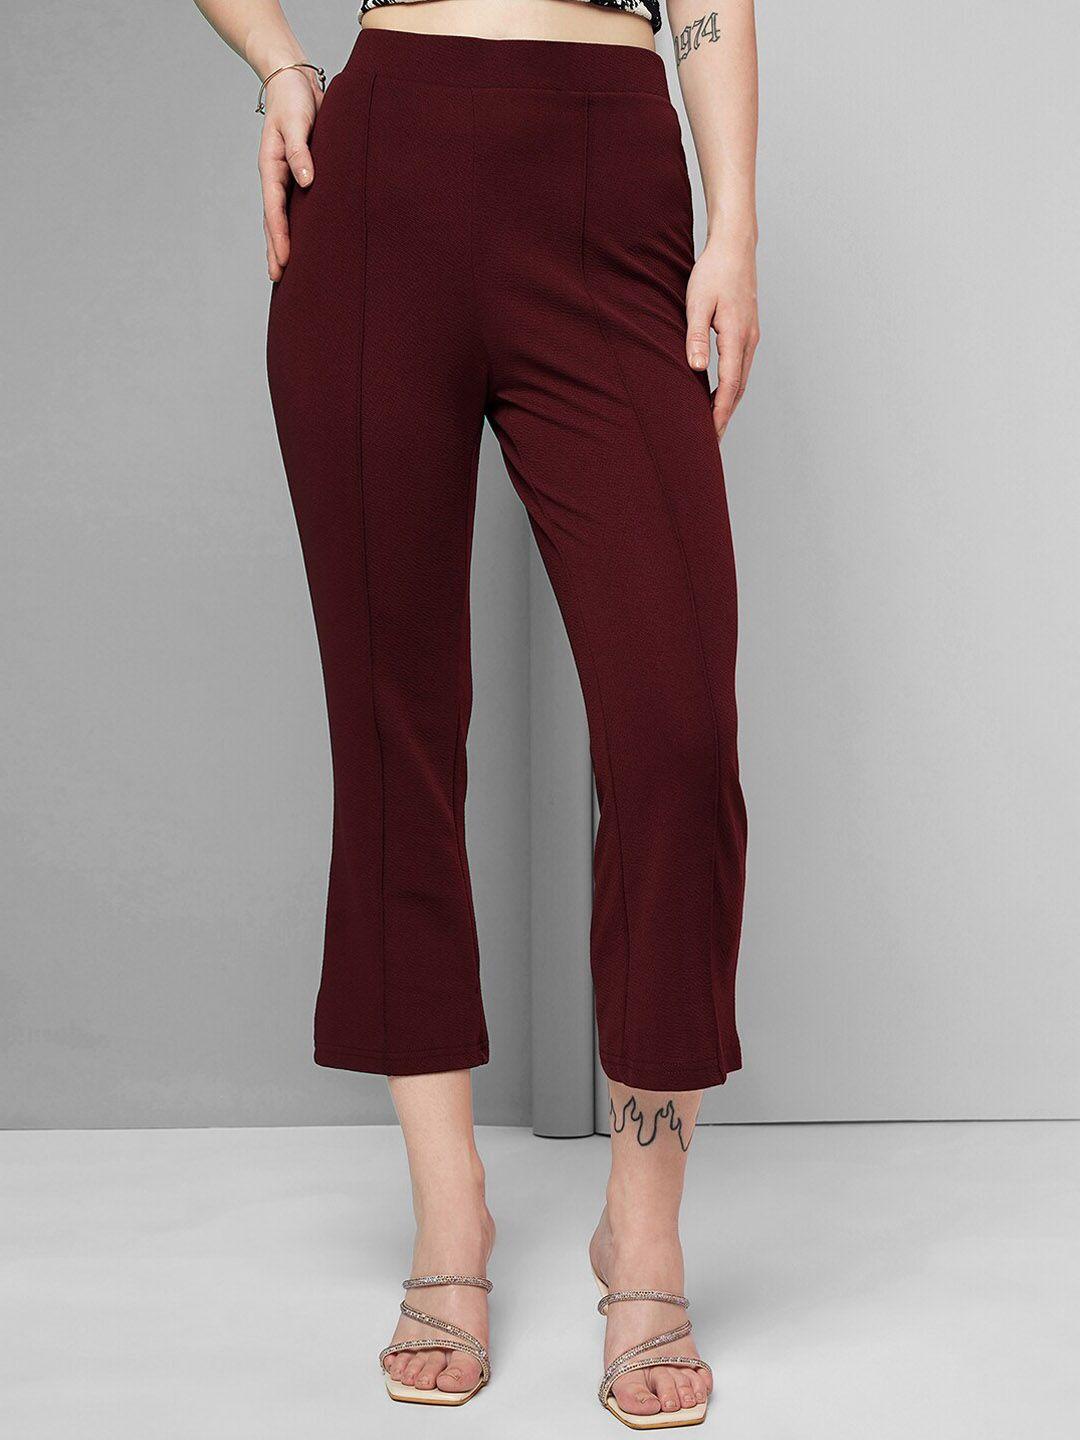 selvia women mid rise easy wash chinos trousers